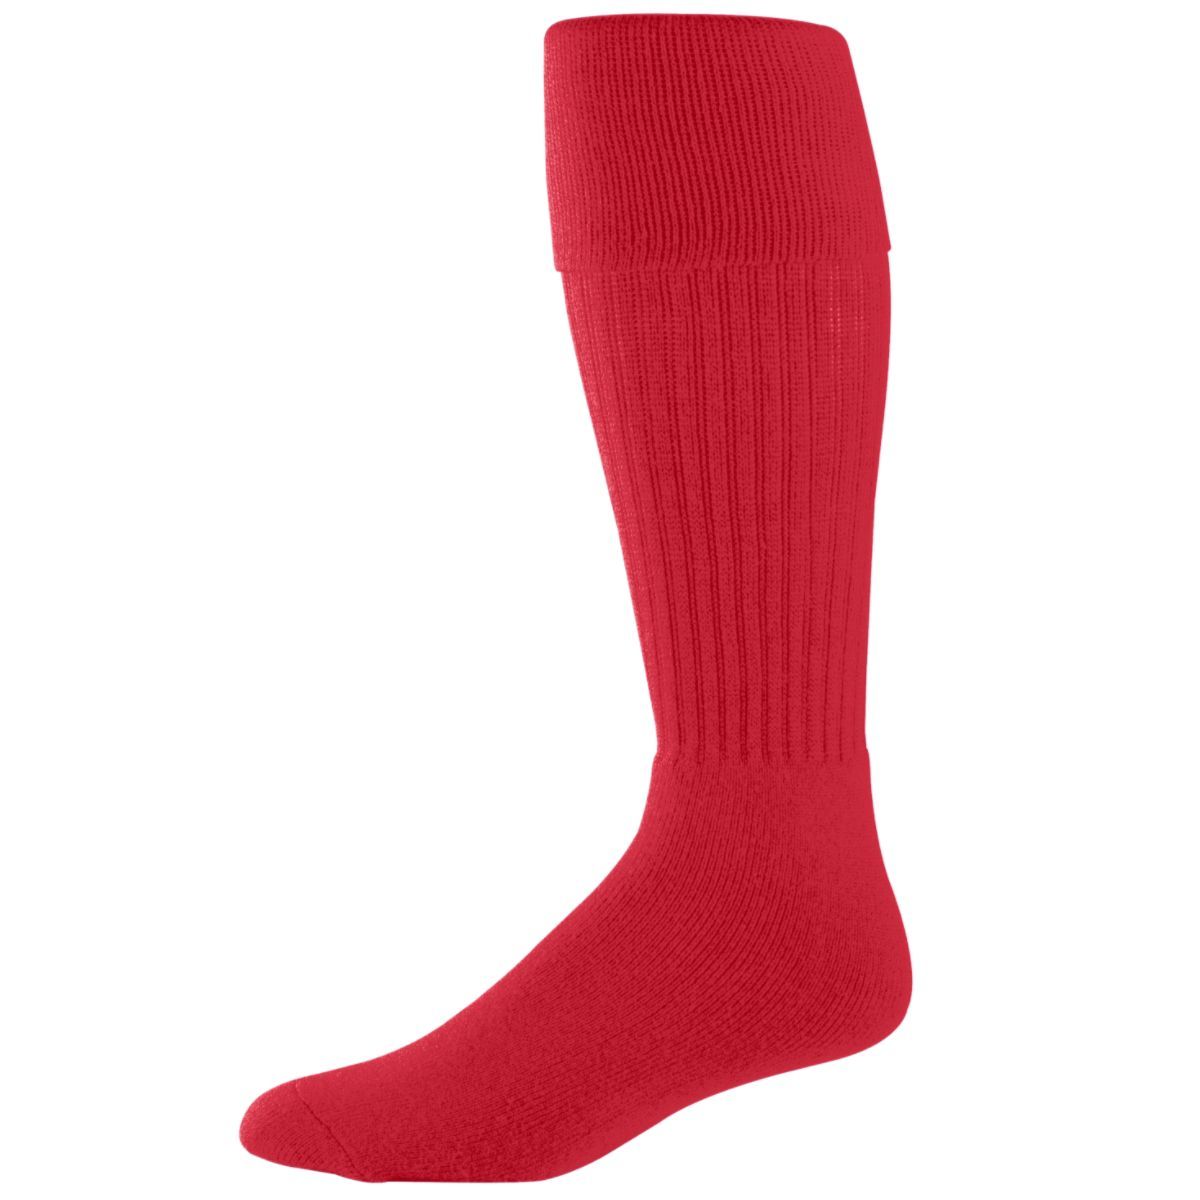 Augusta Sportswear Soccer Sock in Red  -Part of the Accessories, Augusta-Products, Accessories-Socks, Soccer, All-Sports-1 product lines at KanaleyCreations.com